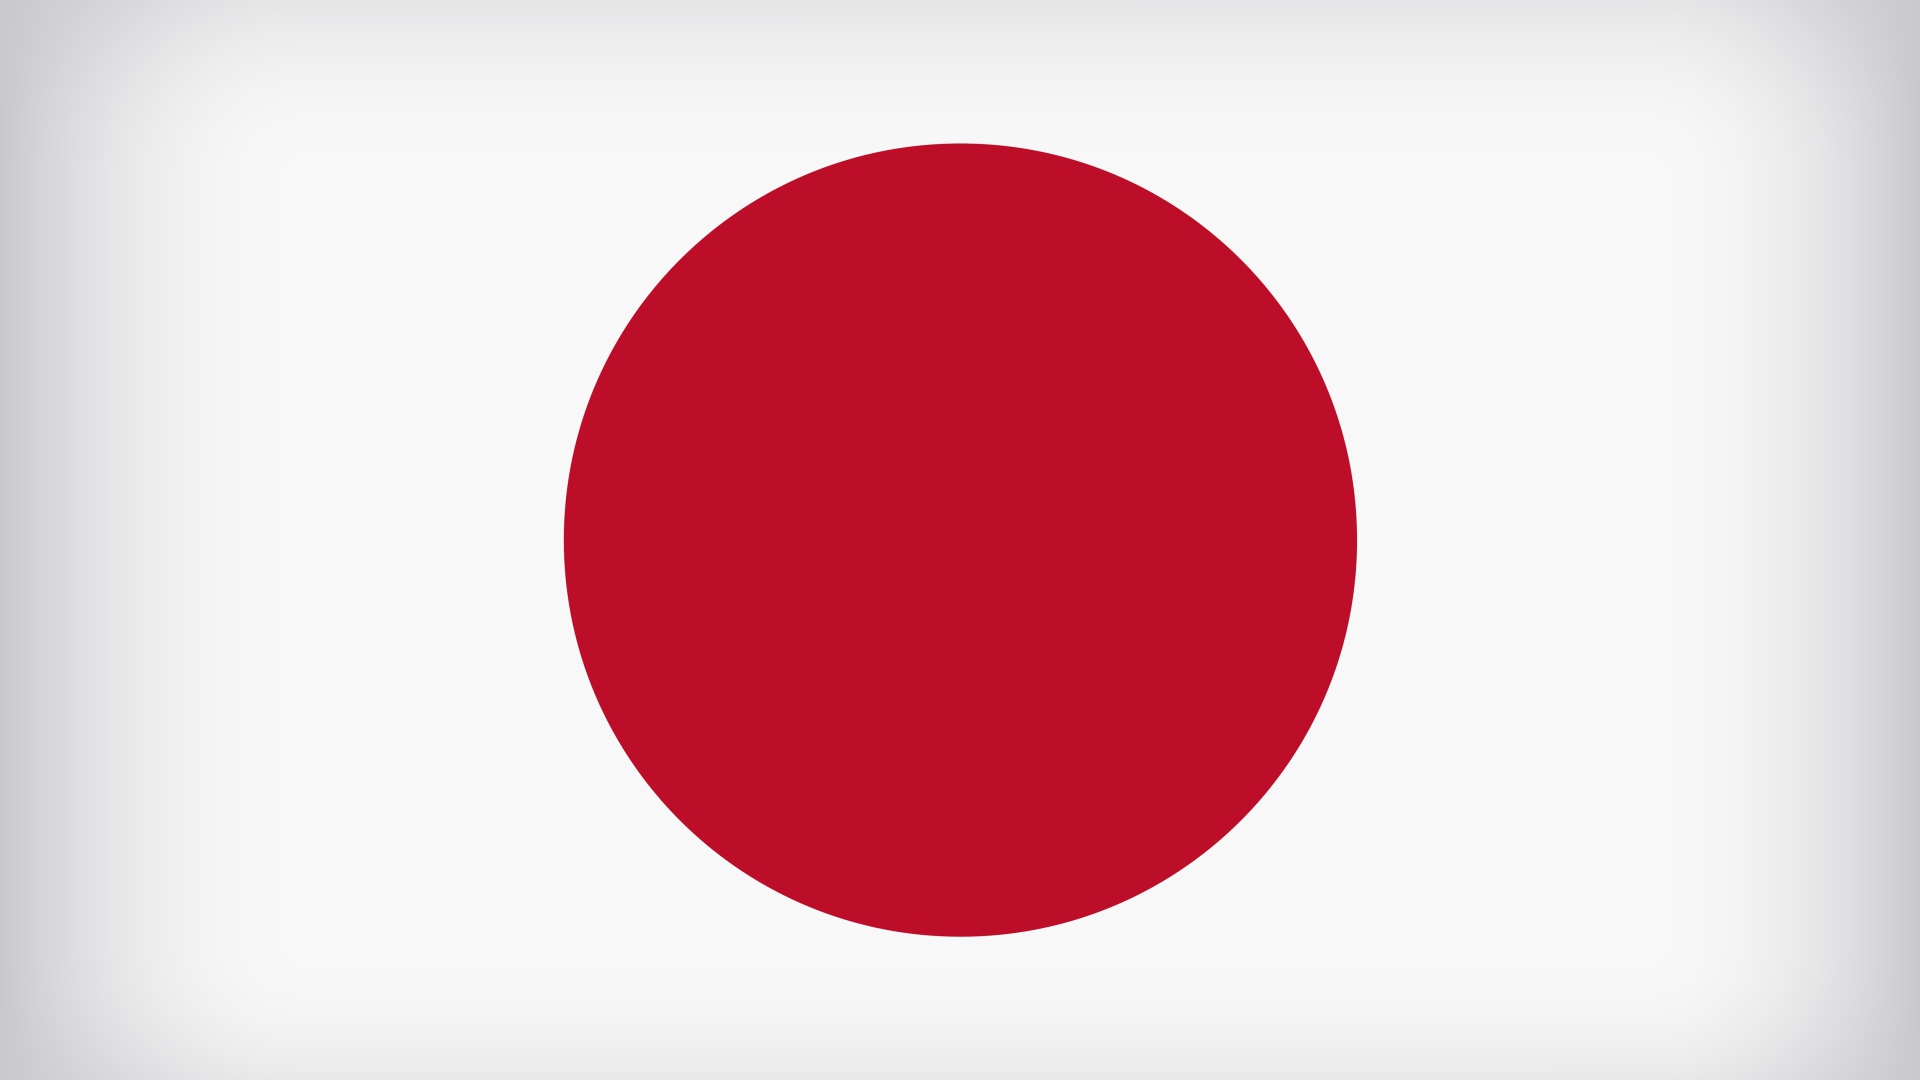 Red circle on a white background, flag of Japan